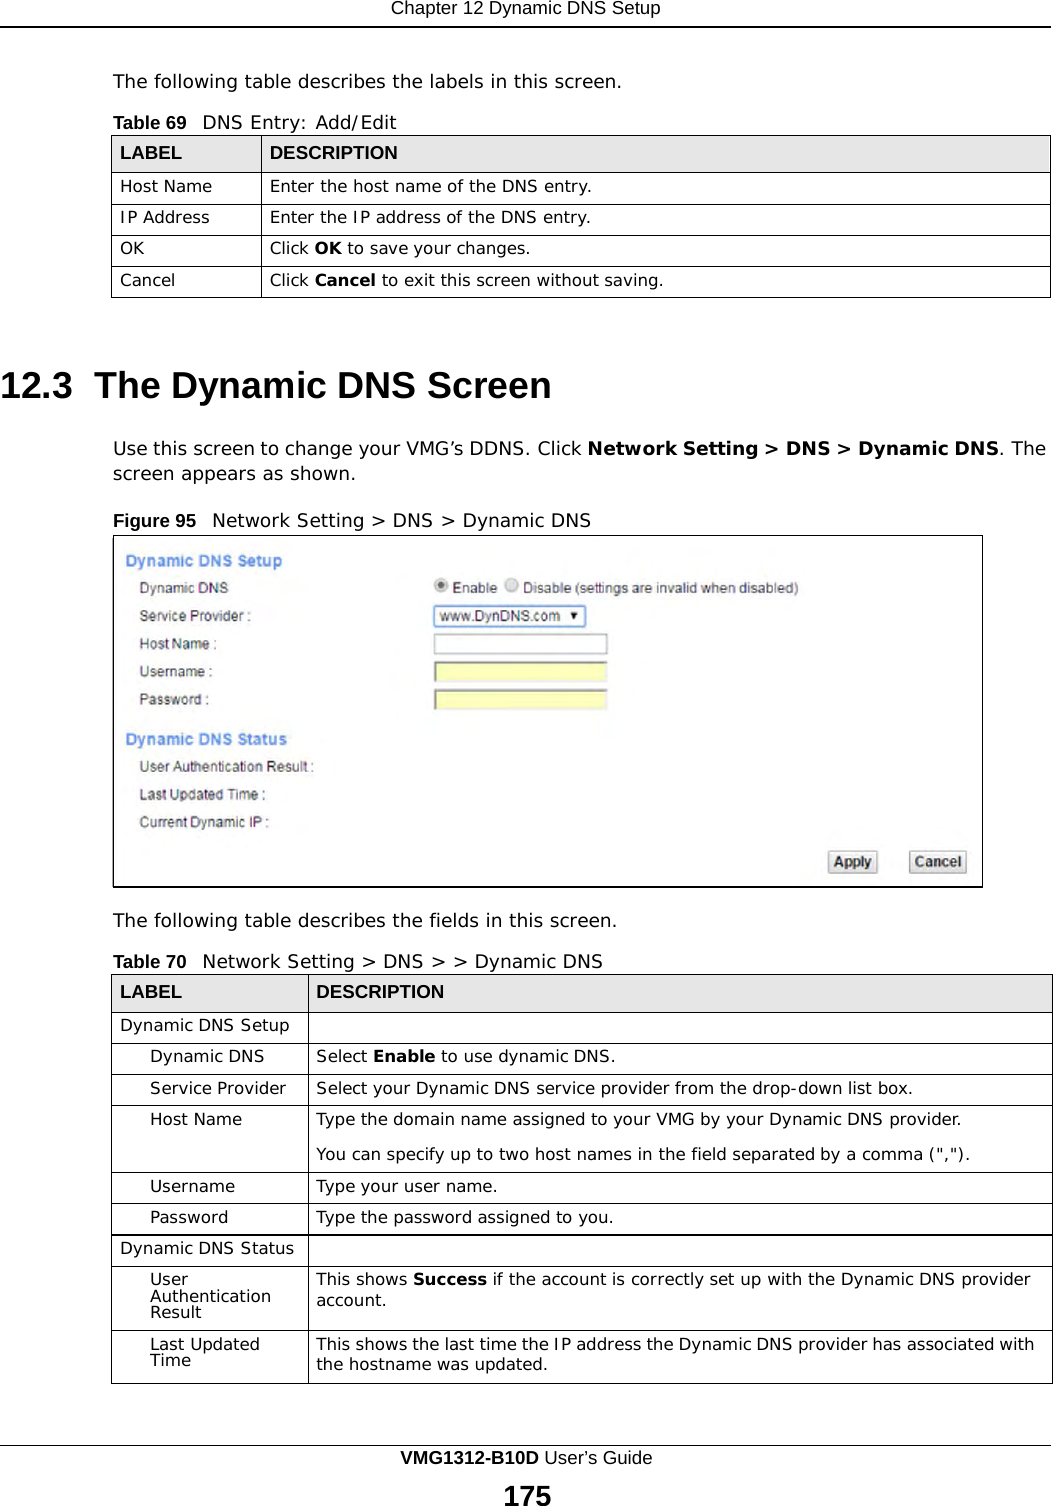 Chapter 12 Dynamic DNS Setup      The following table describes the labels in this screen.  Table 69   DNS Entry: Add/Edit  LABEL DESCRIPTION Host Name Enter the host name of the DNS entry. IP Address Enter the IP address of the DNS entry. OK Click OK to save your changes. Cancel Click Cancel to exit this screen without saving.    12.3 The Dynamic DNS Screen  Use this screen to change your VMG’s DDNS. Click Network Setting &gt; DNS &gt; Dynamic DNS. The screen appears as shown.  Figure 95   Network Setting &gt; DNS &gt; Dynamic DNS                   The following table describes the fields in this screen.  Table 70   Network Setting &gt; DNS &gt; &gt; Dynamic DNS  LABEL DESCRIPTION Dynamic DNS Setup  Dynamic DNS Select Enable to use dynamic DNS. Service Provider Select your Dynamic DNS service provider from the drop-down list box. Host Name Type the domain name assigned to your VMG by your Dynamic DNS provider.  You can specify up to two host names in the field separated by a comma (&quot;,&quot;). Username Type your user name. Password Type the password assigned to you. Dynamic DNS Status  User Authentication Result This shows Success if the account is correctly set up with the Dynamic DNS provider account. Last Updated Time This shows the last time the IP address the Dynamic DNS provider has associated with the hostname was updated. VMG1312-B10D User’s Guide 175  